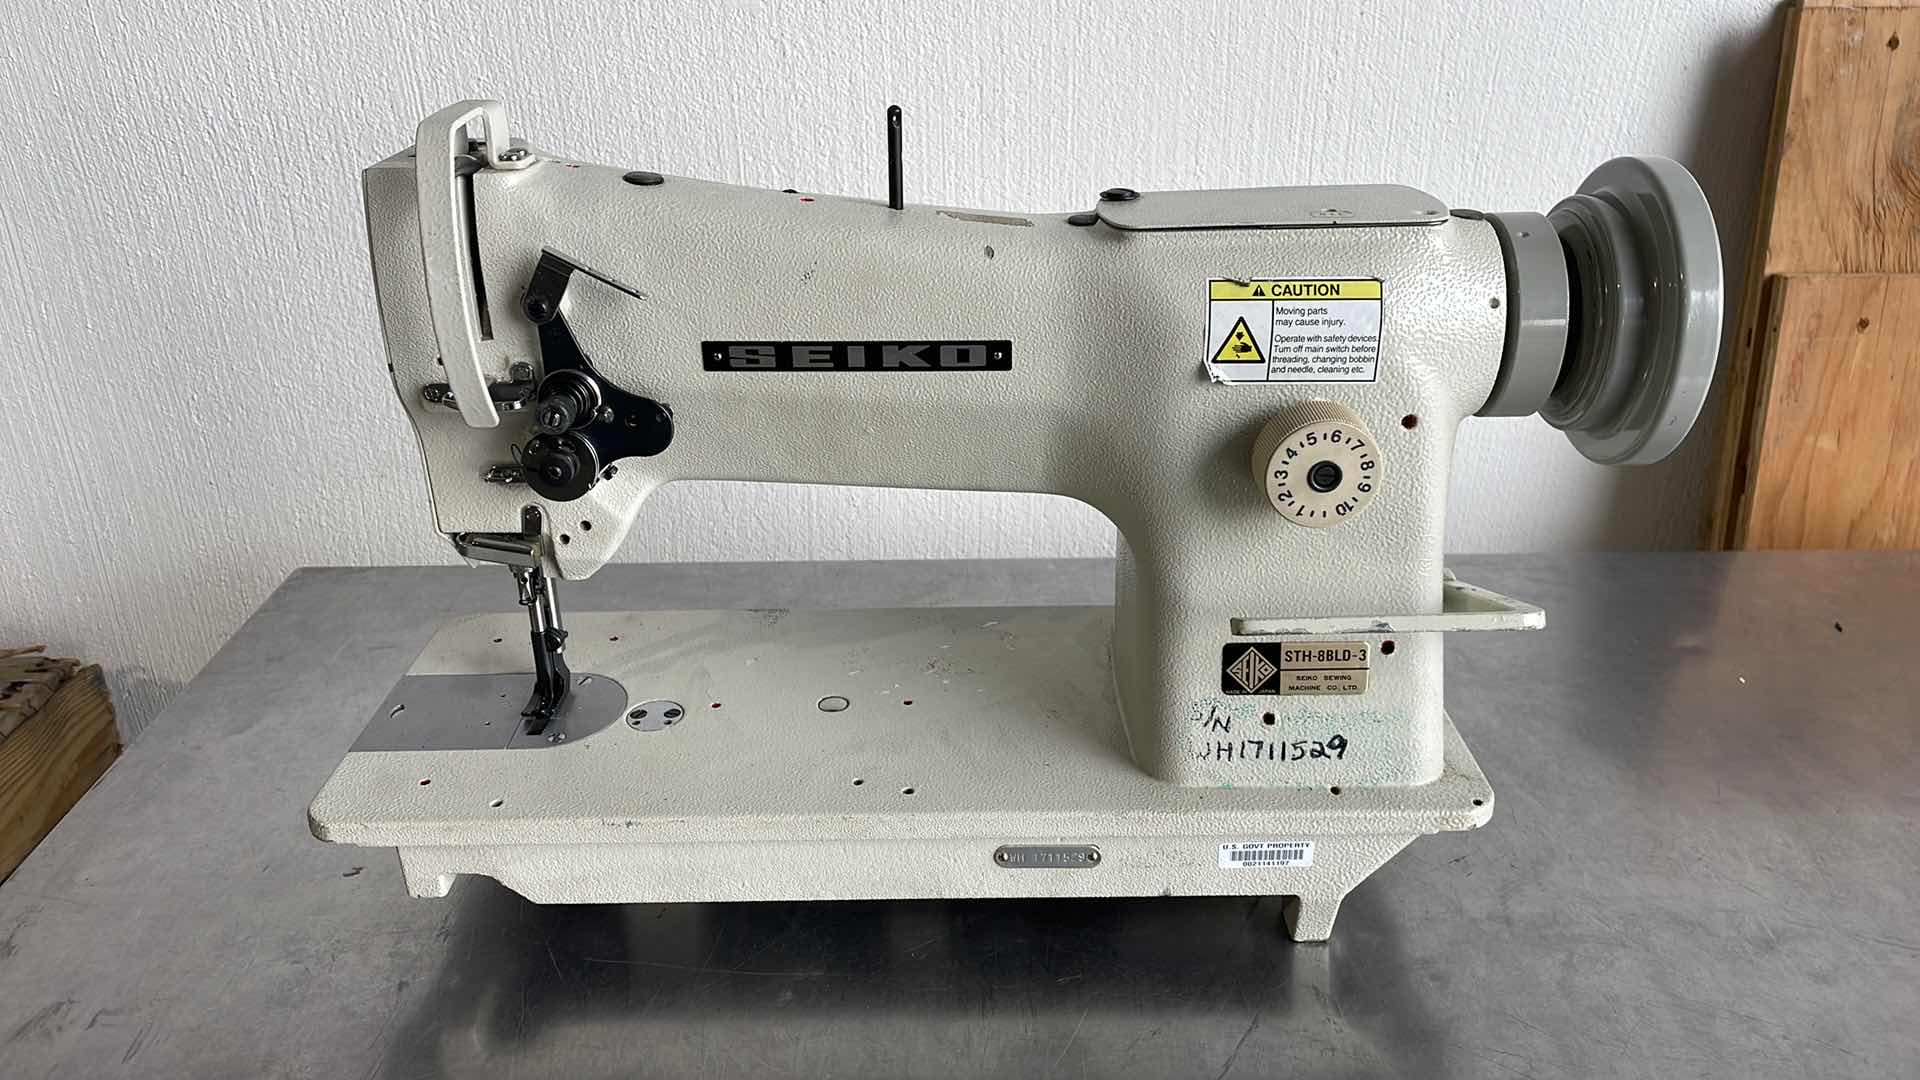 SEIKO STH-8BLD-3 SEWING MACHINE NEEDS MOTOR UNABLE TO TEST